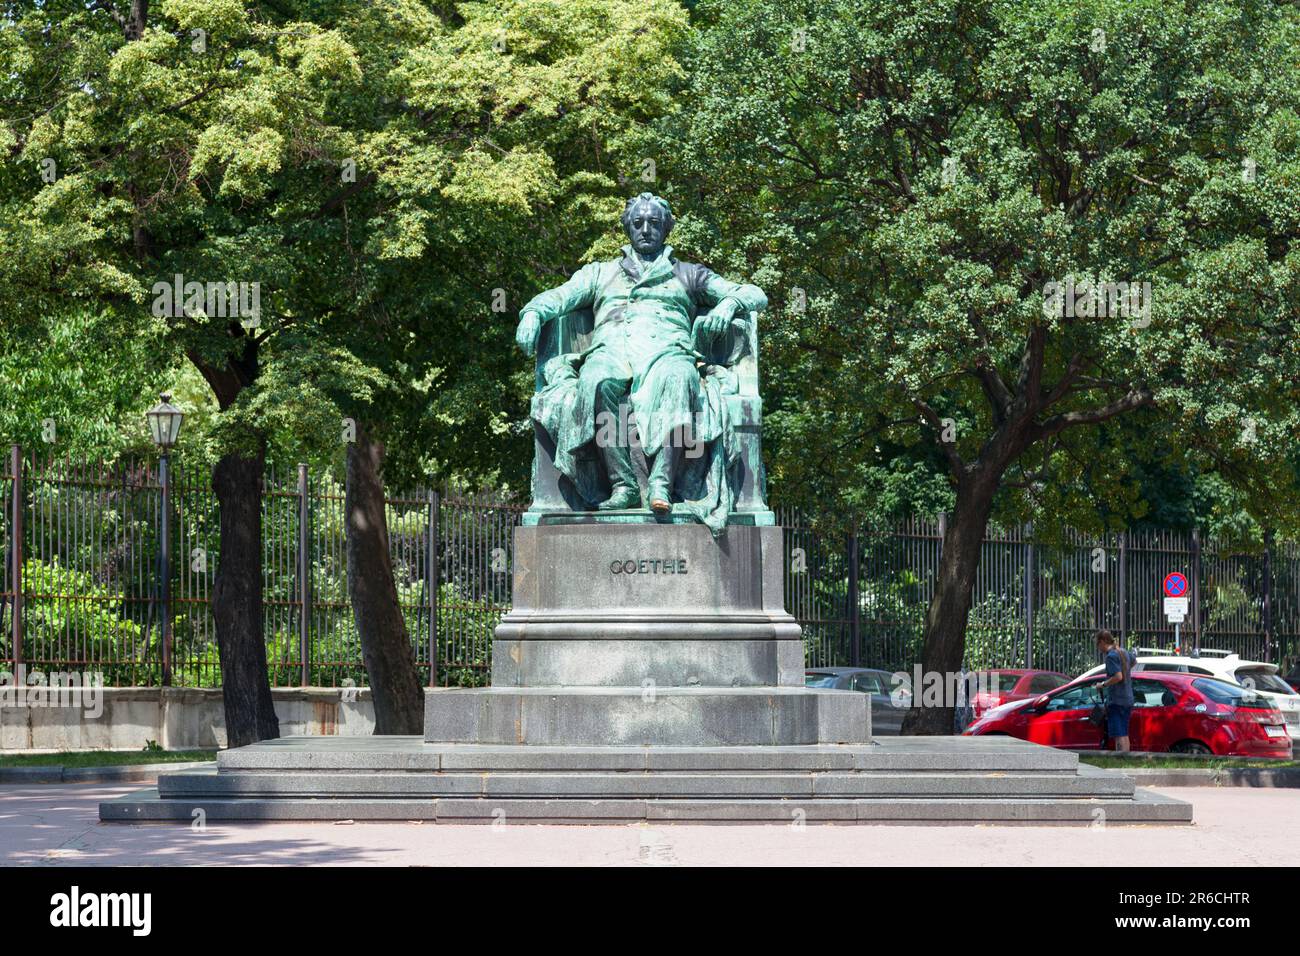 Vienna, Austria - June 17 2018: The Goethe statue is a monument located at the corner of Burggarten. It is dedicated to Johann Wolfgang von Goethe. Th Stock Photo